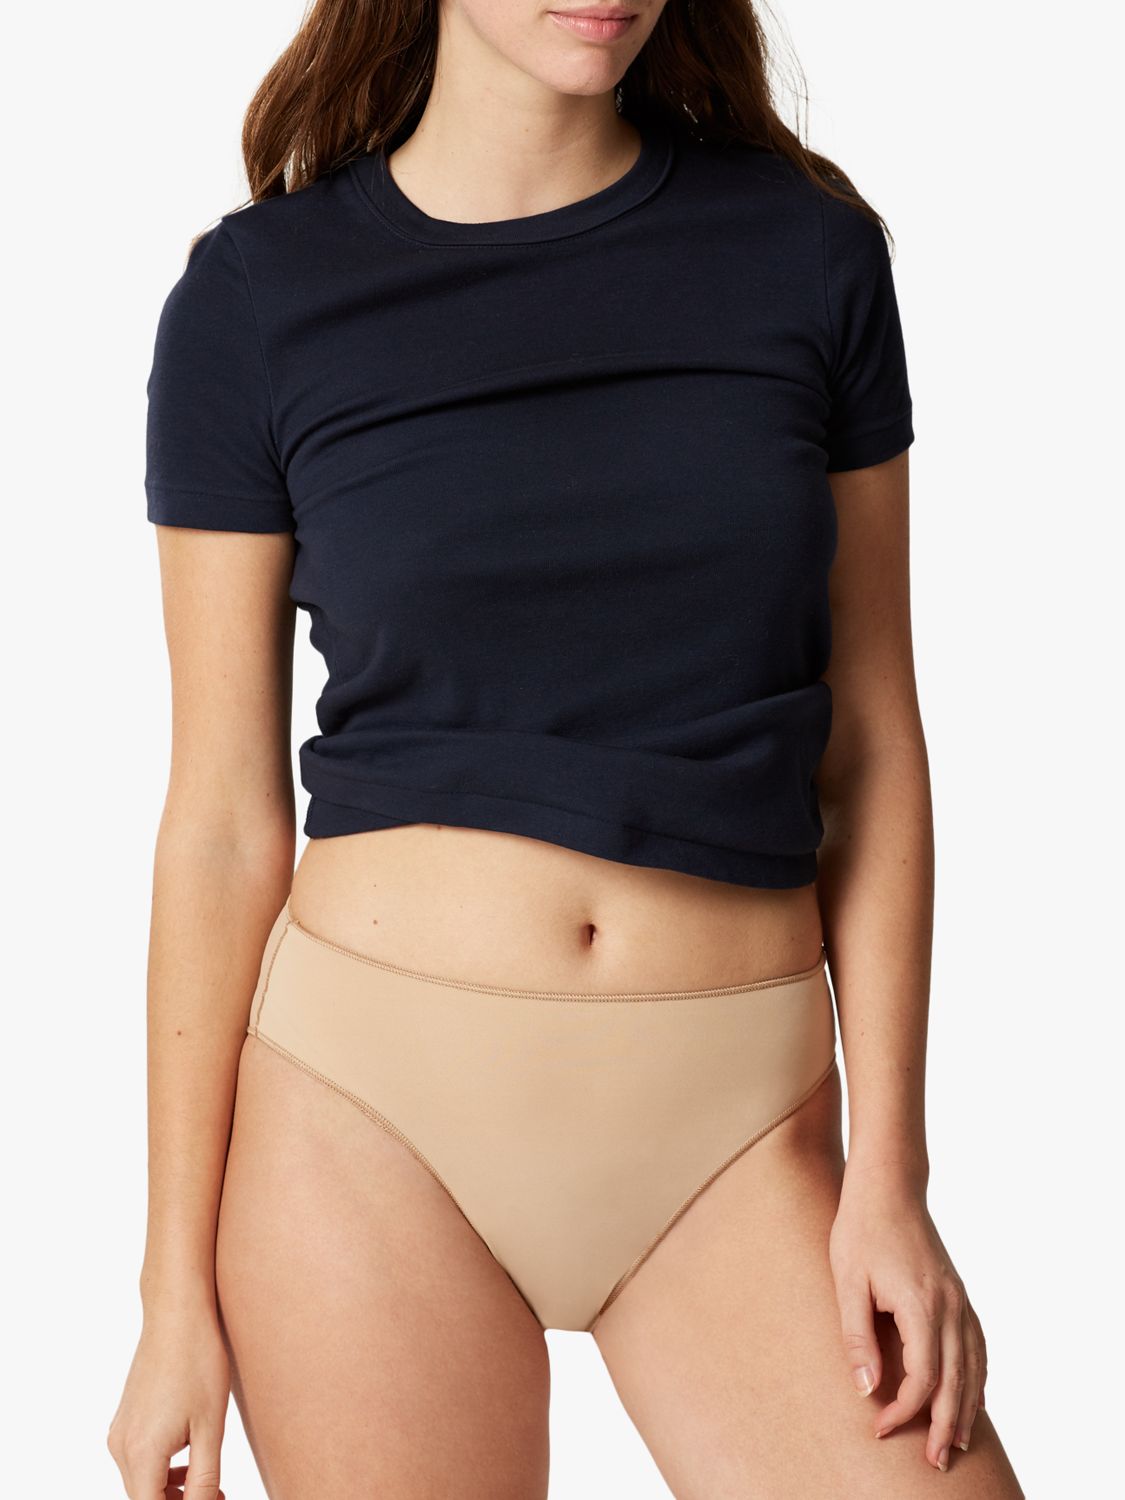 Maison Lejaby Les Invisibles High Waisted Briefs, Power Skin